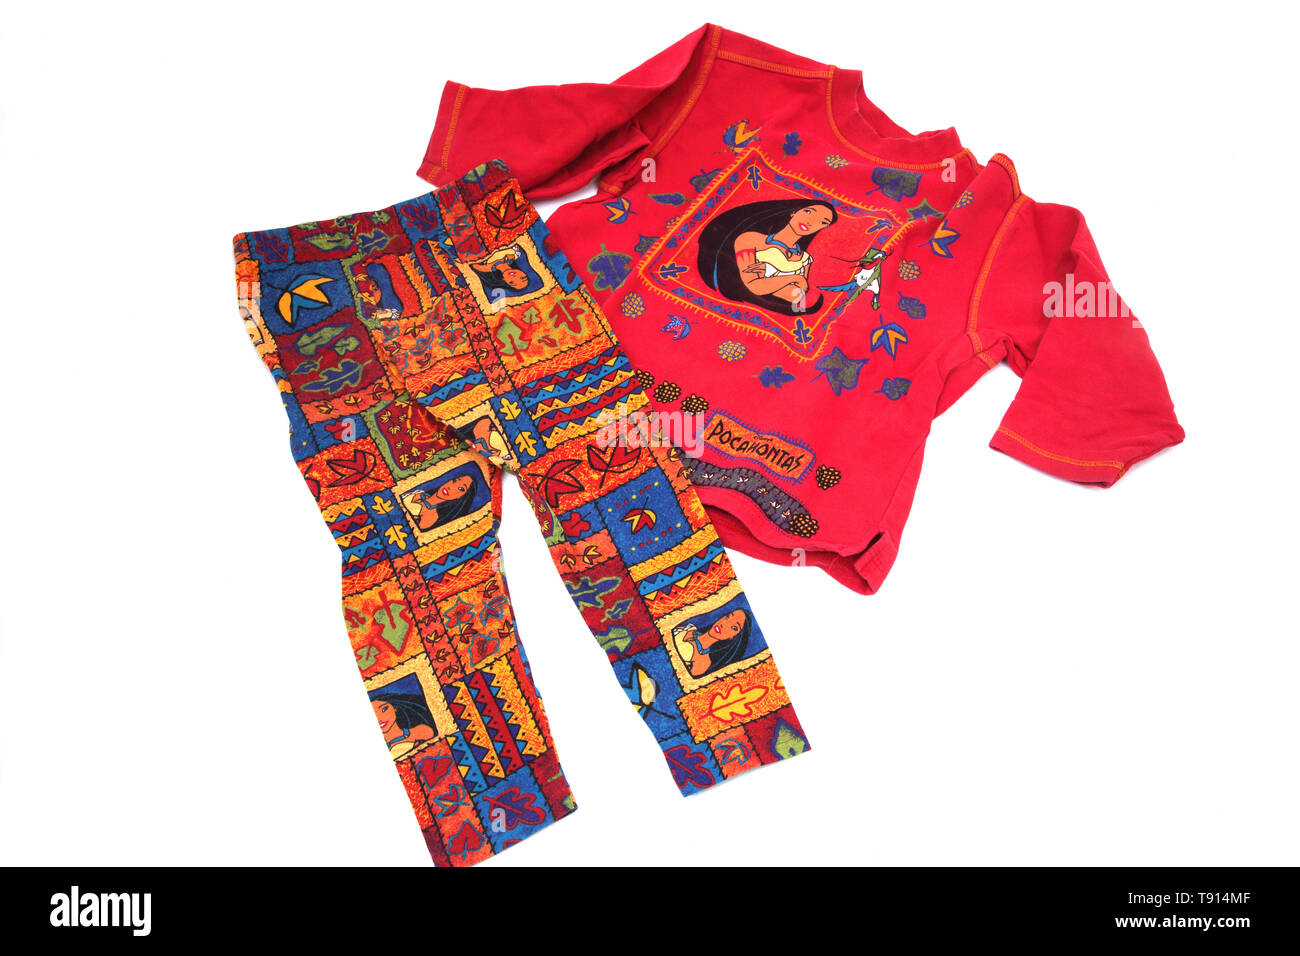 A Child's Two Piece Set Disney's Pocahontas Jumper and Leggings Stock Photo